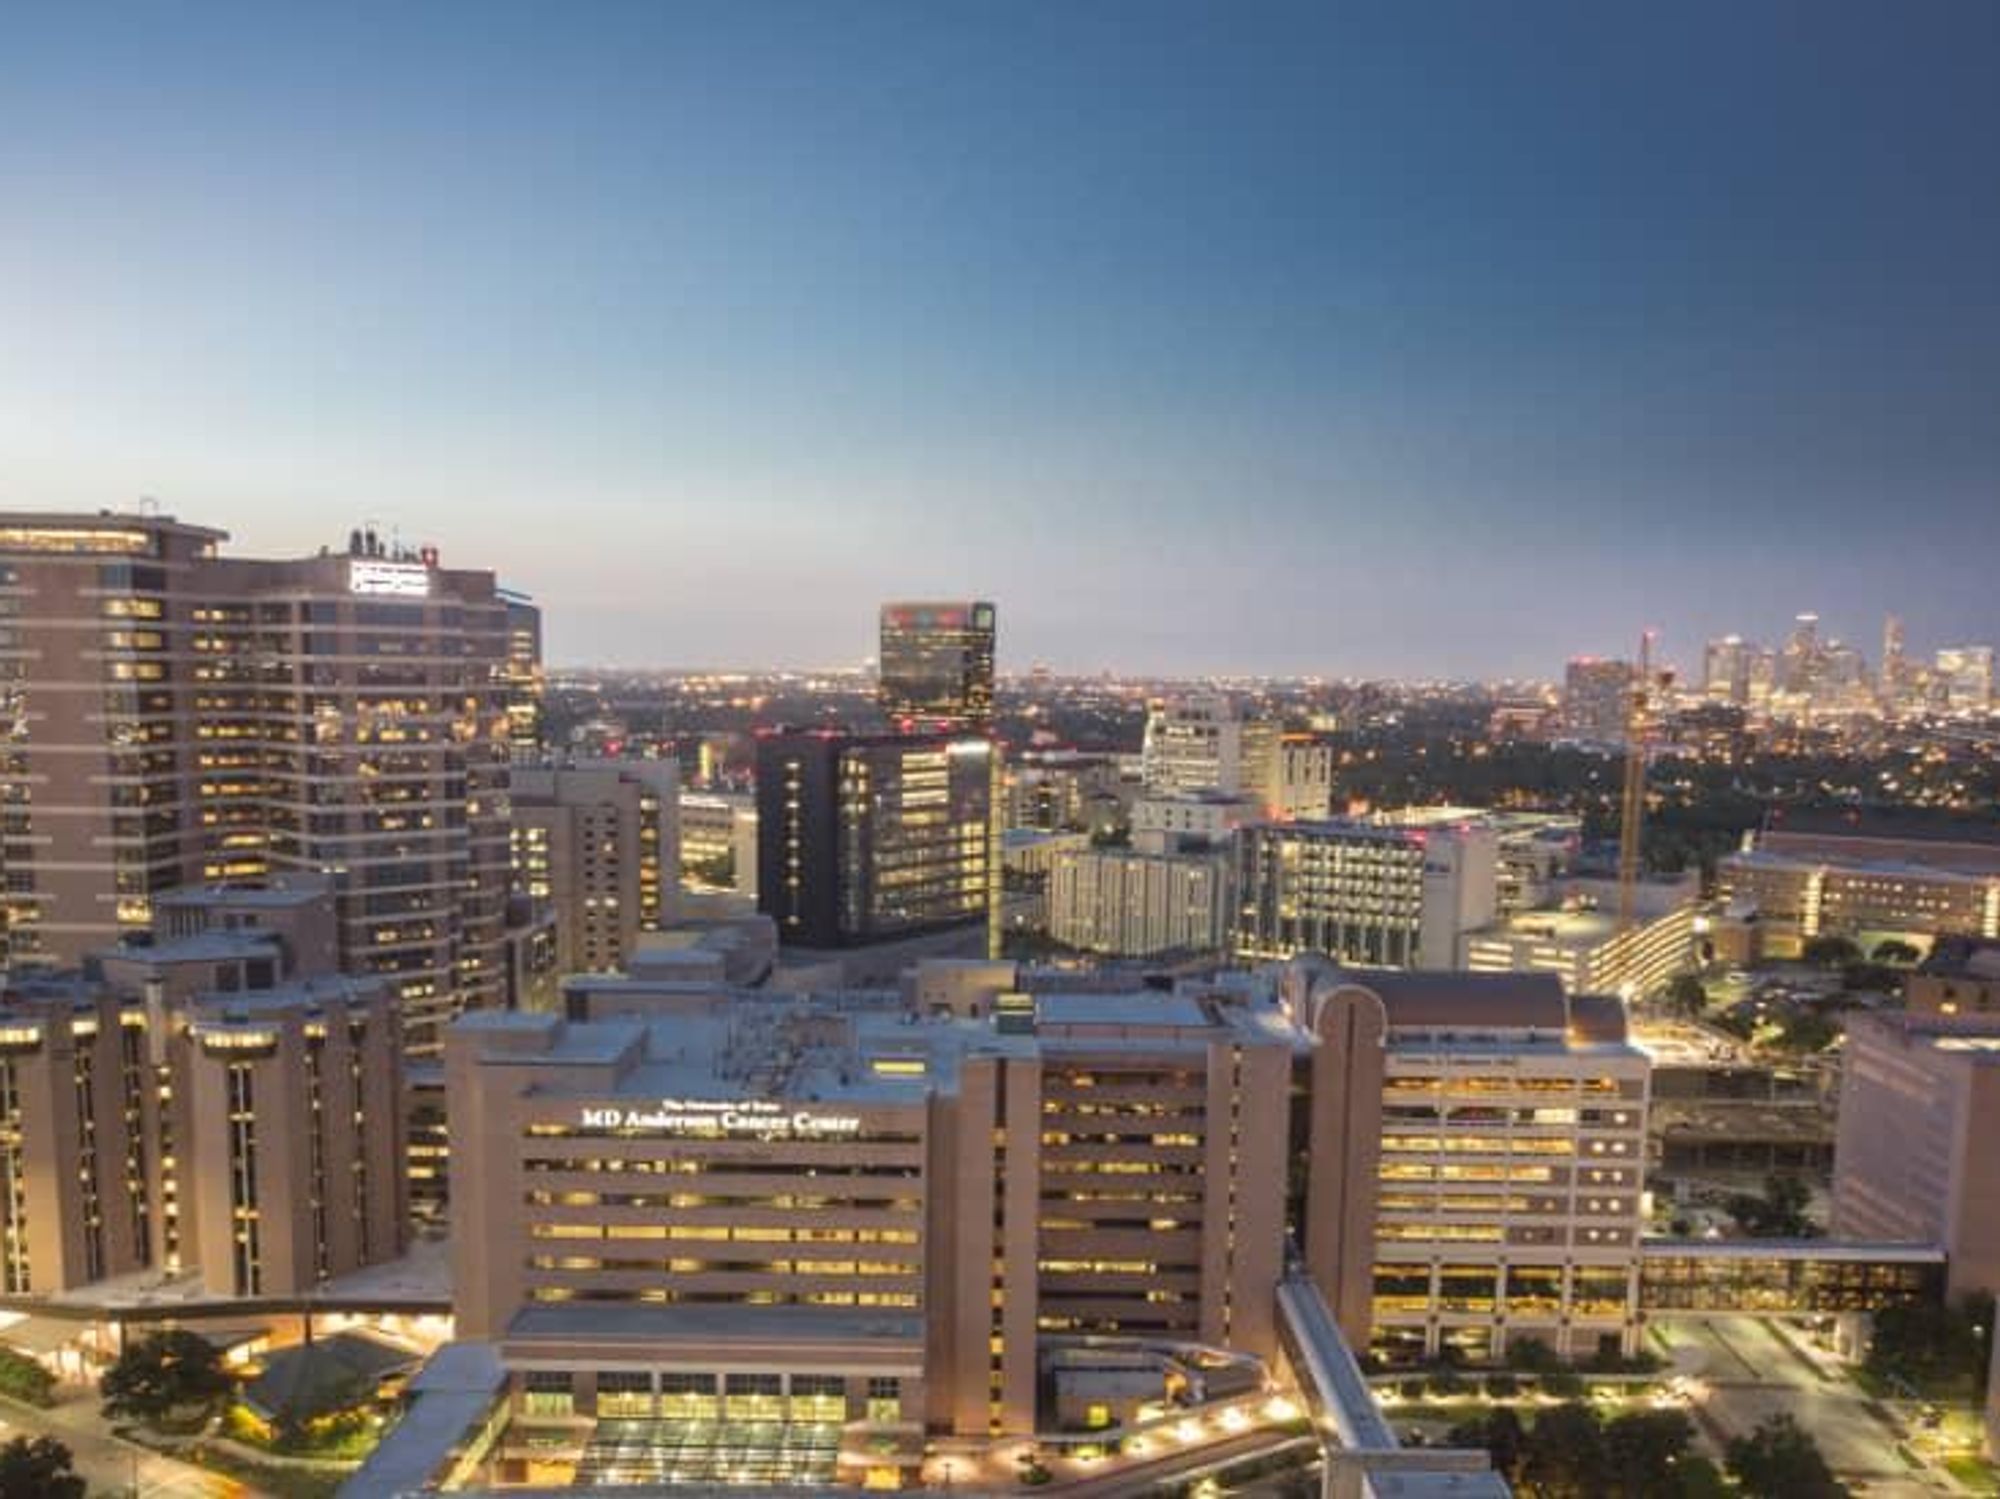 MD Anderson cancer center houston